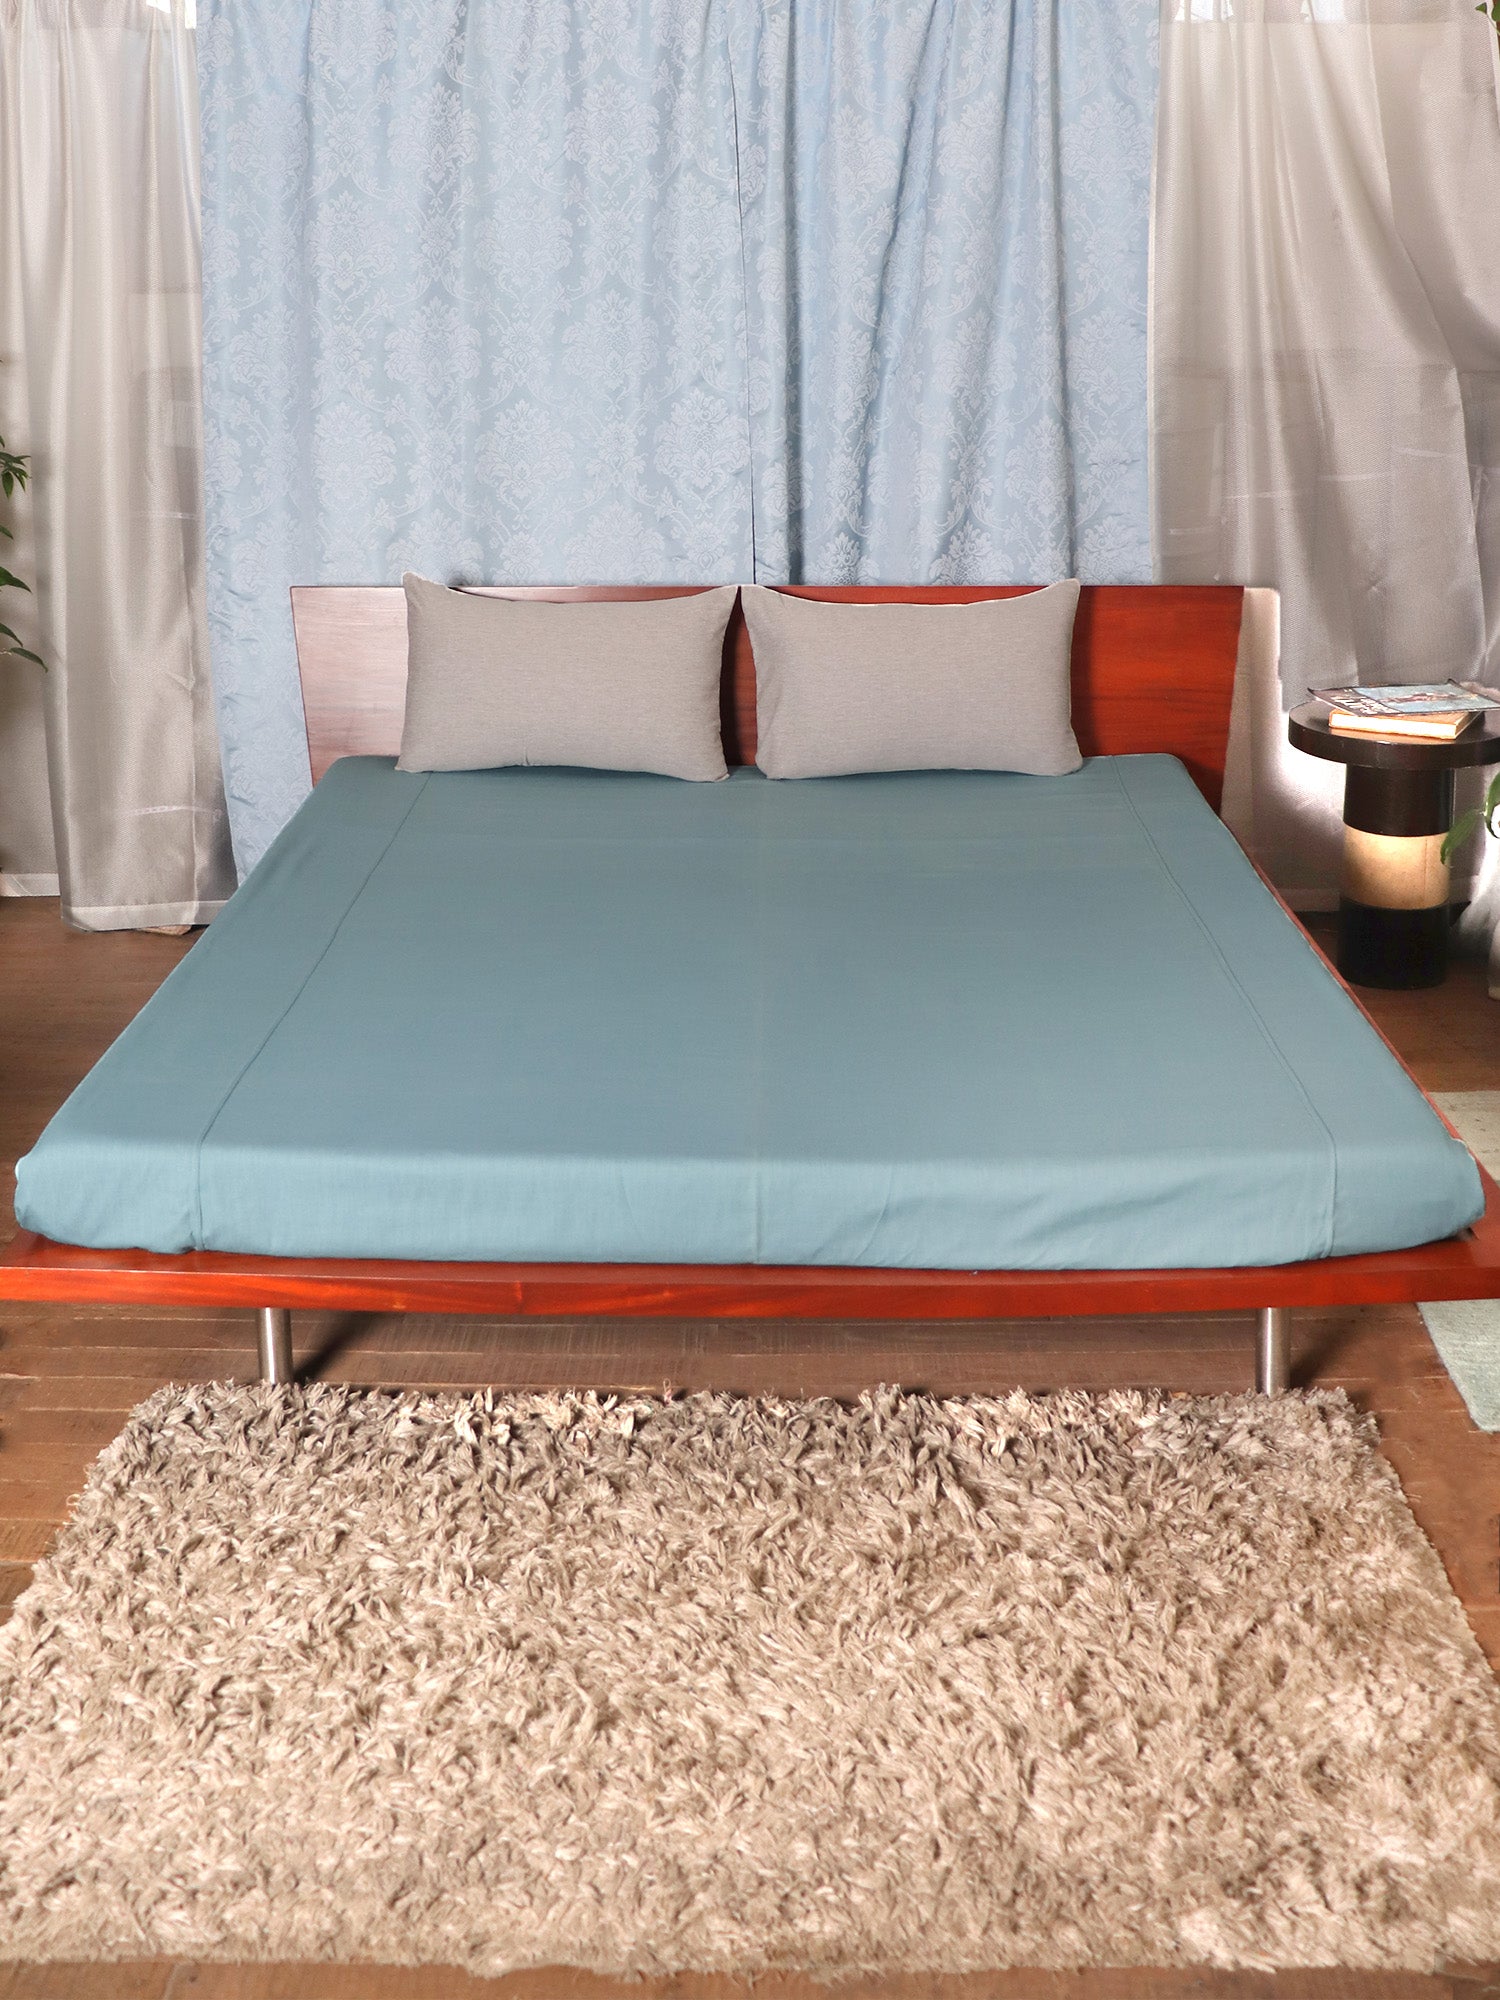 Textured Bedcover for Double Bed with 2 Pillow Covers | Queen Size - Teal Blue | Bedcover 90 x 108inches (7.5x9ft), Pillow Covers 17x27in